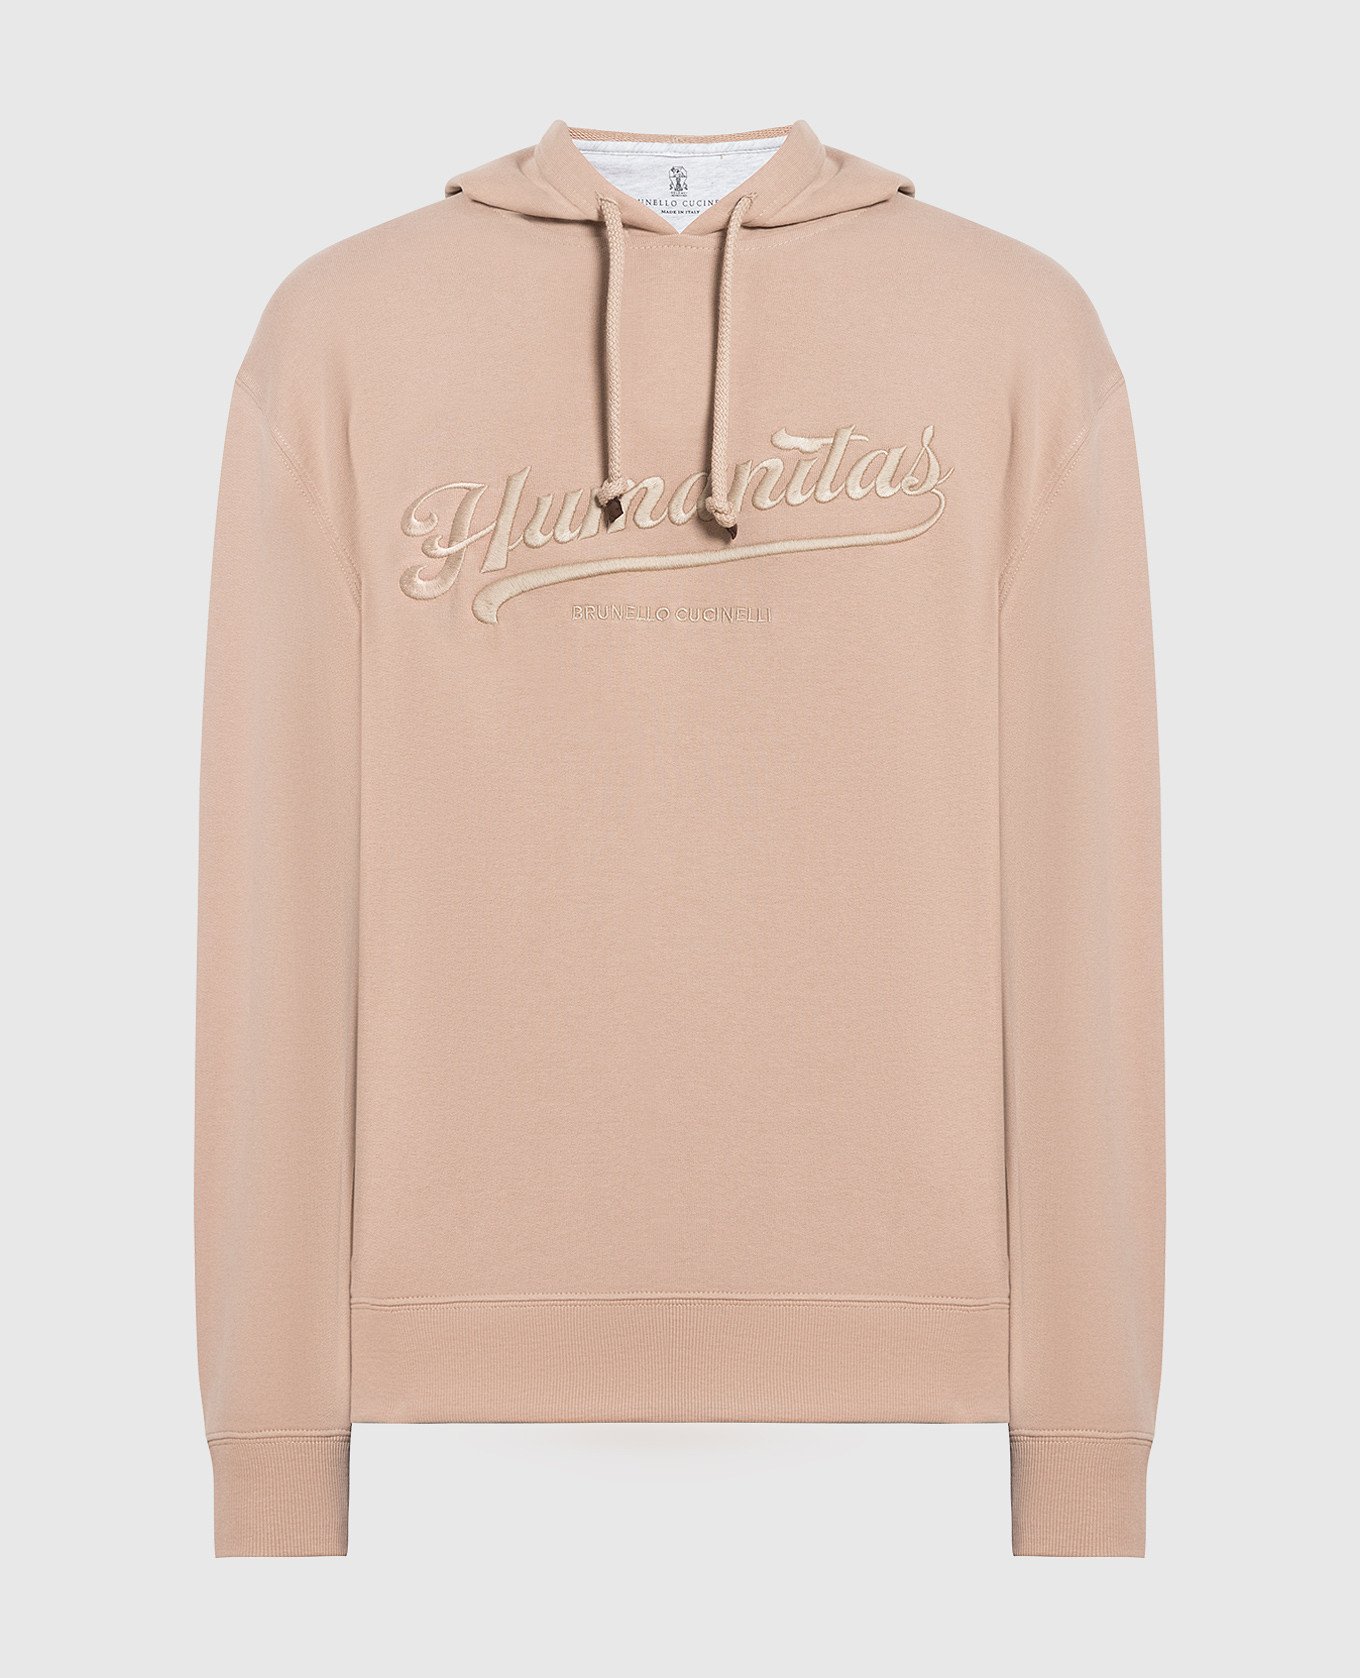 Brown hoodie with logo embroidery